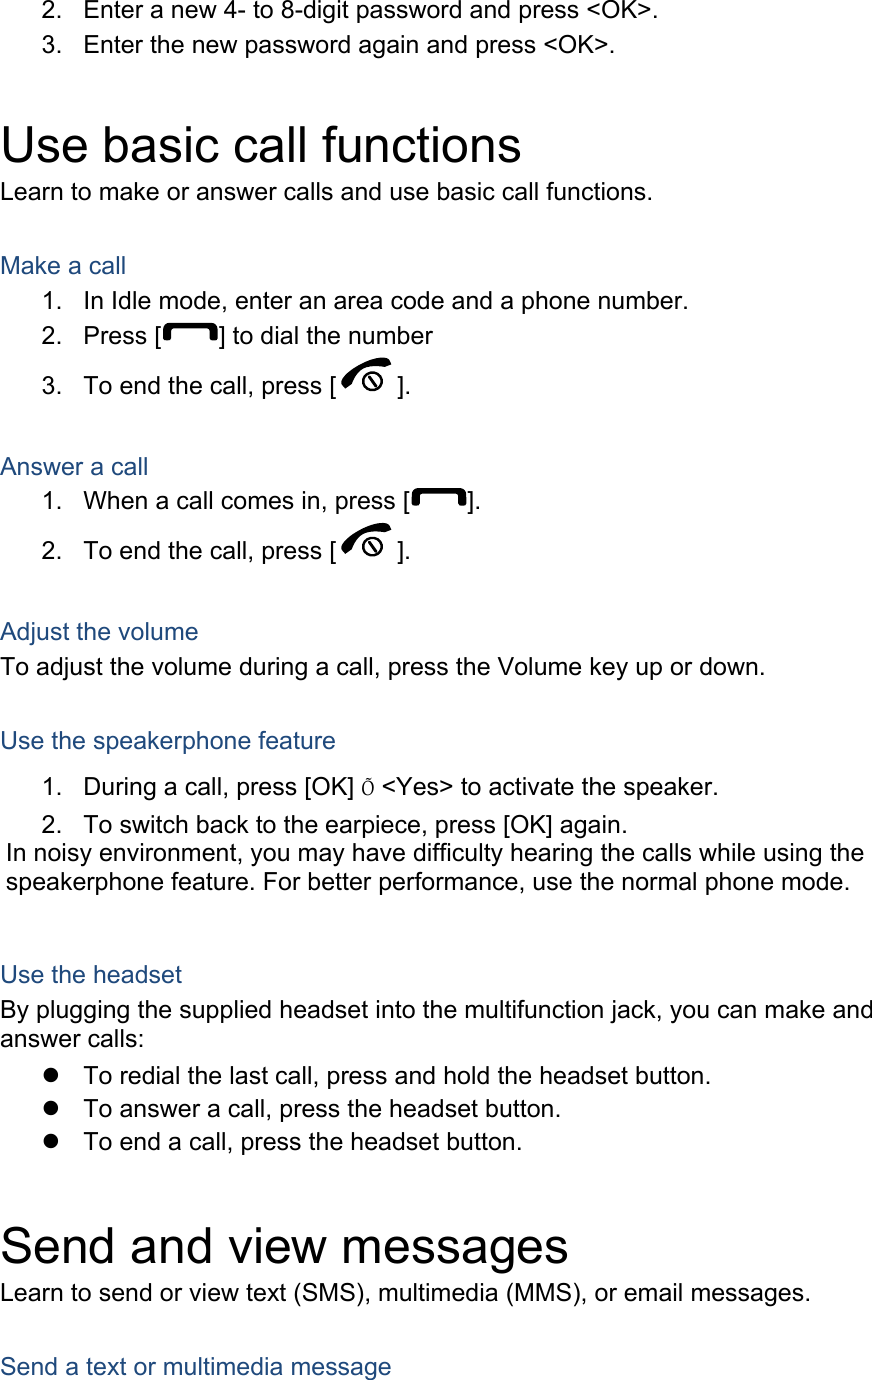 2.  Enter a new 4- to 8-digit password and press &lt;OK&gt;. 3.  Enter the new password again and press &lt;OK&gt;.  Use basic call functions Learn to make or answer calls and use basic call functions.  Make a call 1.  In Idle mode, enter an area code and a phone number. 2. Press [ ] to dial the number 3.  To end the call, press [ ].   Answer a call 1.  When a call comes in, press [ ]. 2.  To end the call, press [ ].  Adjust the volume To adjust the volume during a call, press the Volume key up or down.  Use the speakerphone feature 1.  During a call, press [OK] Õ &lt;Yes&gt; to activate the speaker. 2.  To switch back to the earpiece, press [OK] again. In noisy environment, you may have difficulty hearing the calls while using the speakerphone feature. For better performance, use the normal phone mode.  Use the headset By plugging the supplied headset into the multifunction jack, you can make and answer calls: z  To redial the last call, press and hold the headset button. z  To answer a call, press the headset button. z  To end a call, press the headset button.  Send and view messages Learn to send or view text (SMS), multimedia (MMS), or email messages.  Send a text or multimedia message 